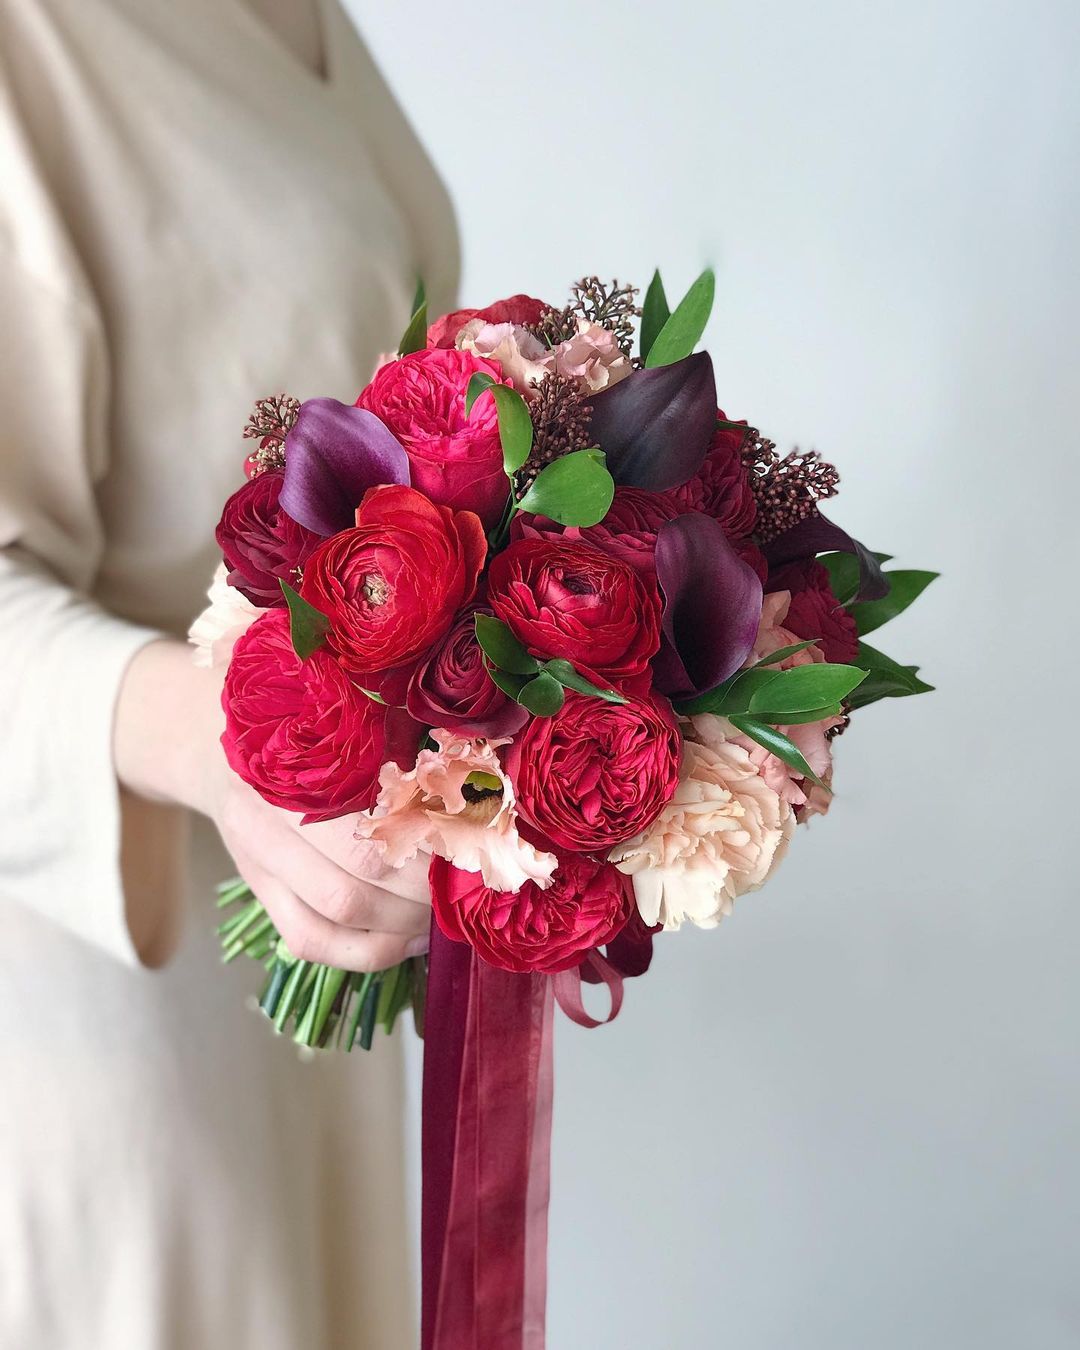 wedding bouquet ideas inspiration rose gold and marsala flowers